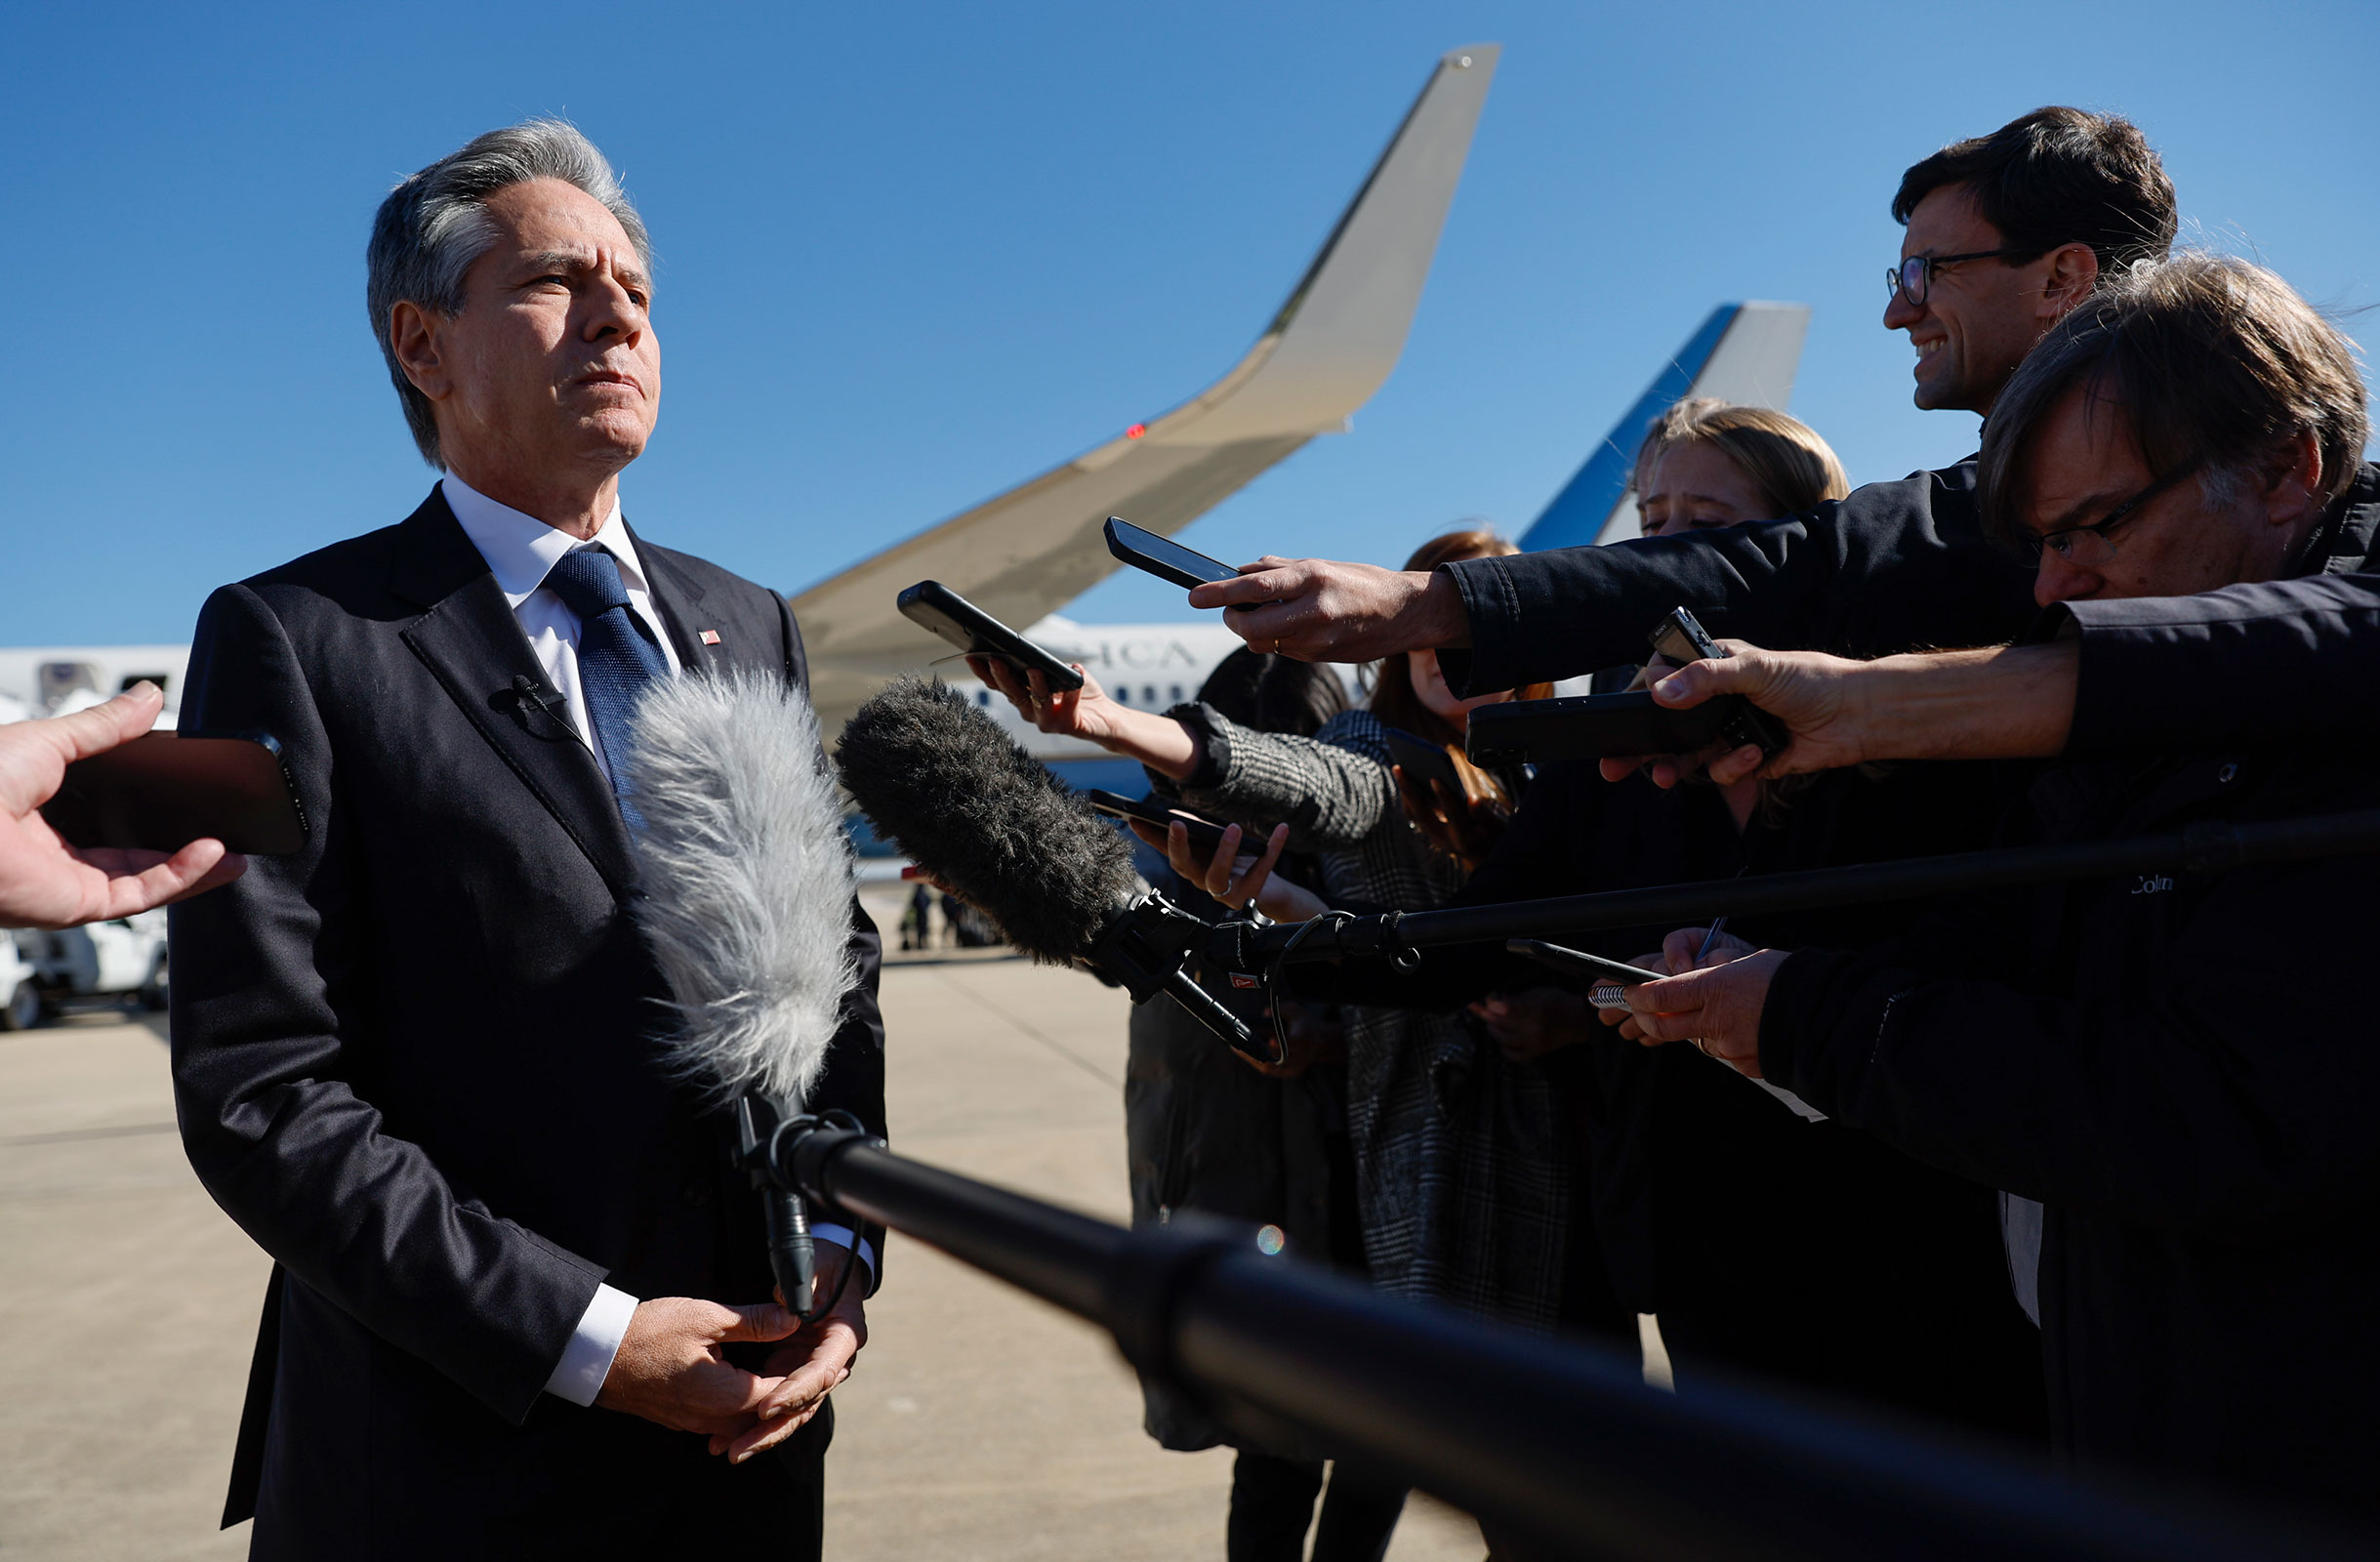 Secretary of State Antony Blinken talks to reporters prior boarding his aircraft to depart Washington on travel to the Middle East and Asia at Andrews Air Force Base in Maryland on Thursday.